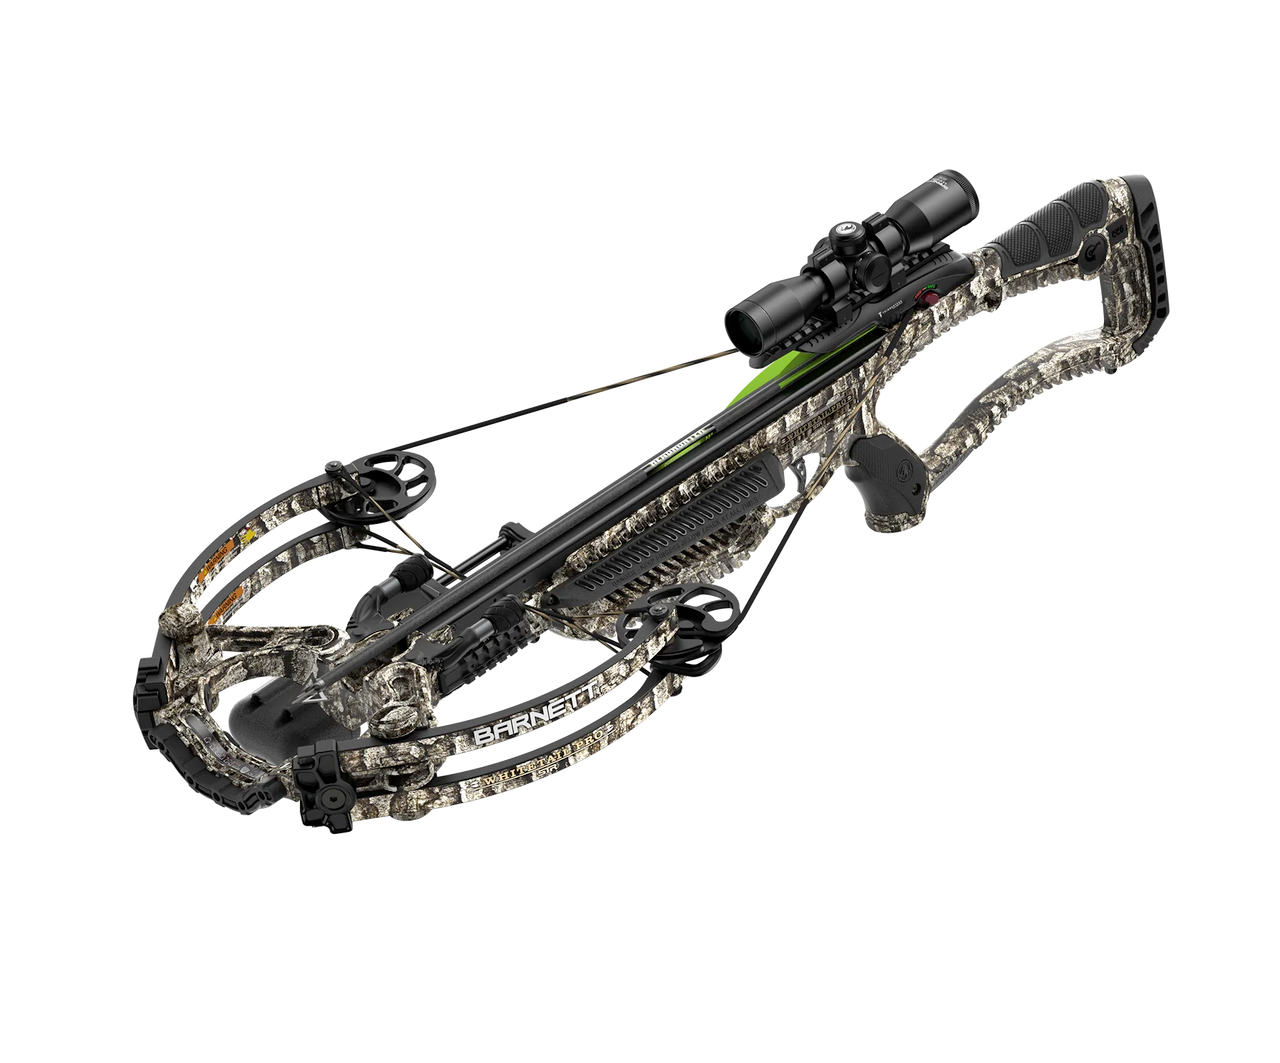 Barnett Whitetail Pro STR Crossbow Kit, w/ 4x32mm Illuminated Scope, Side-Mount Quiver, Arrows, Wax, Rope Cocking Device